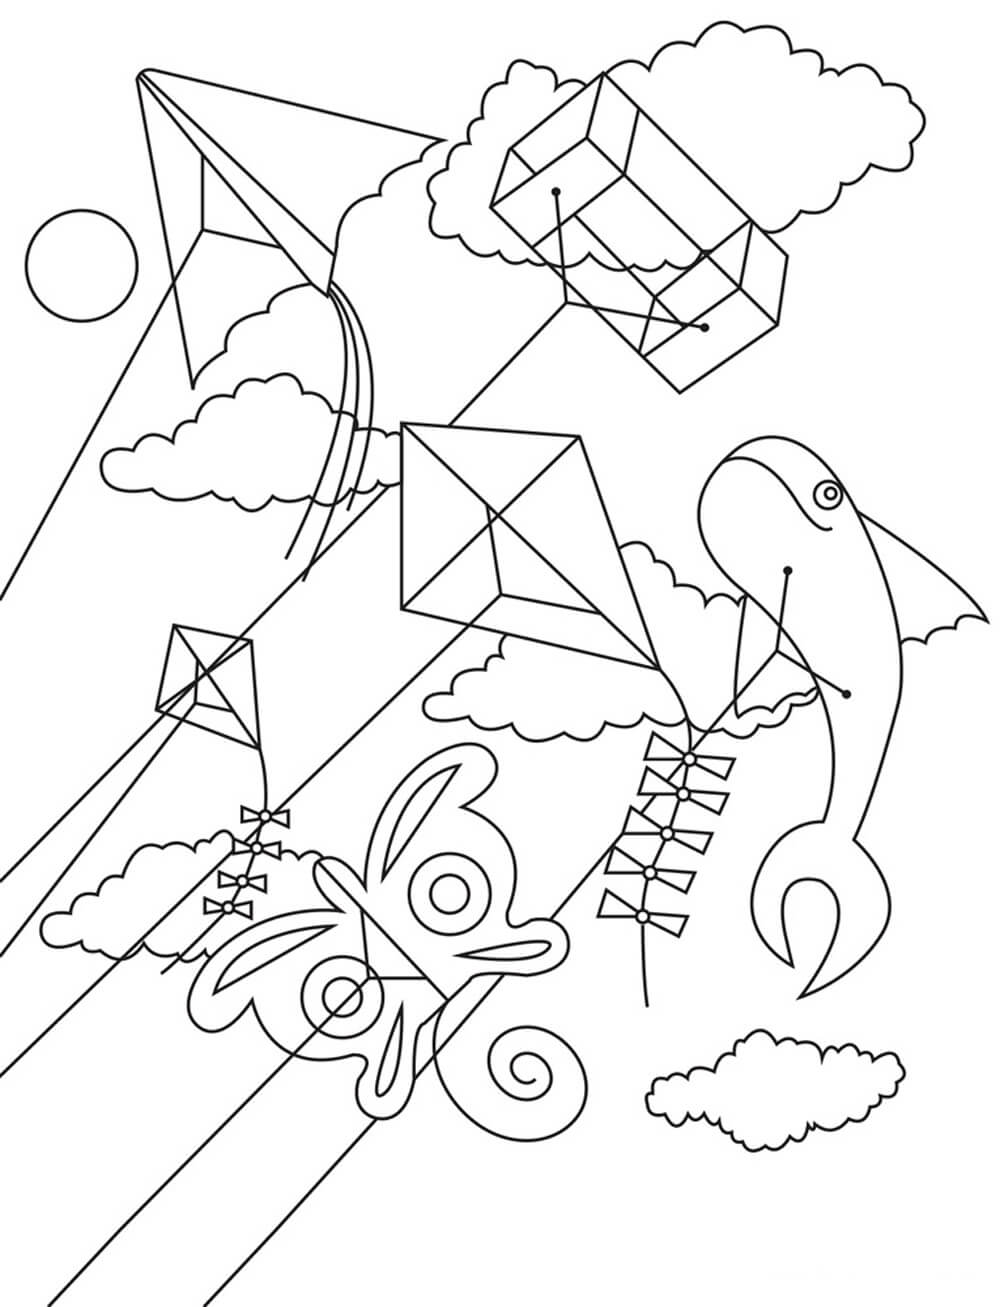 simple-kite-coloring-page-free-printable-coloring-pages-for-kids